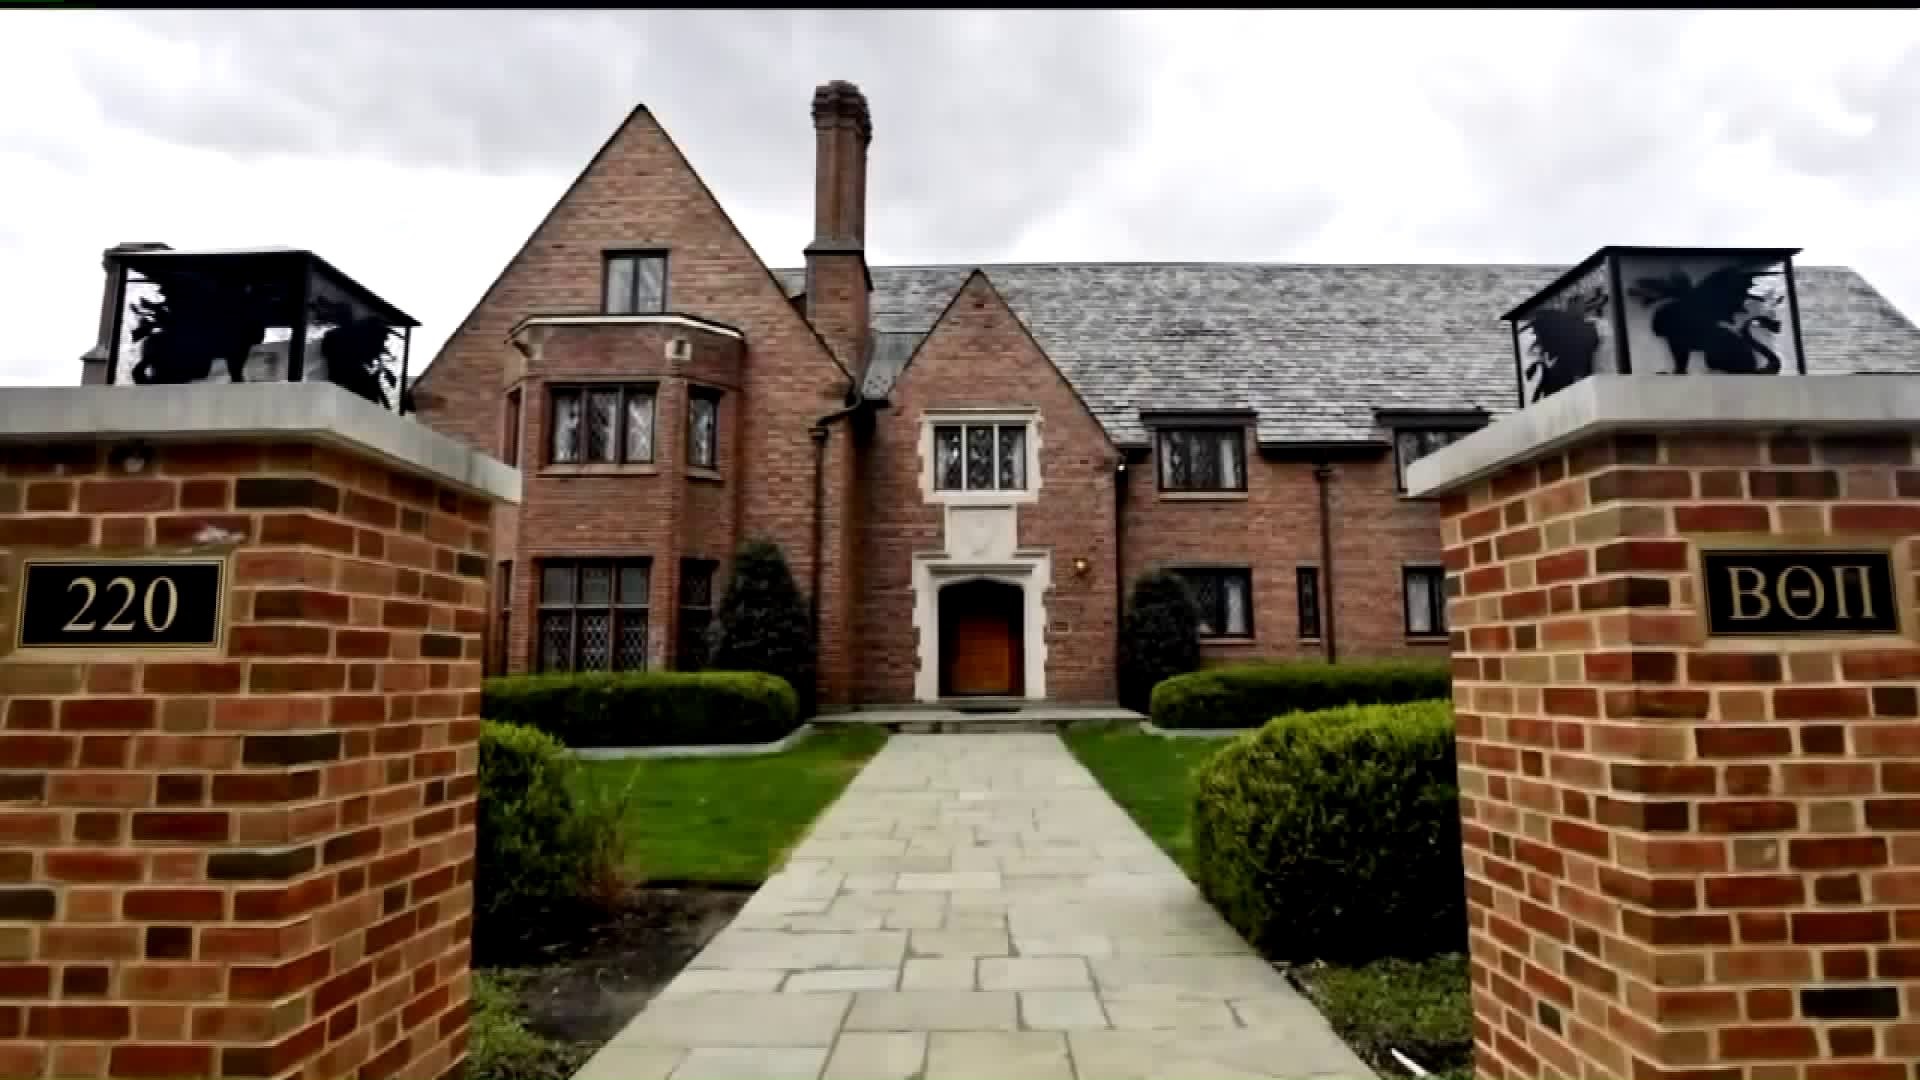 Most Serious Charges Dismissed Against Penn State Frat Brothers